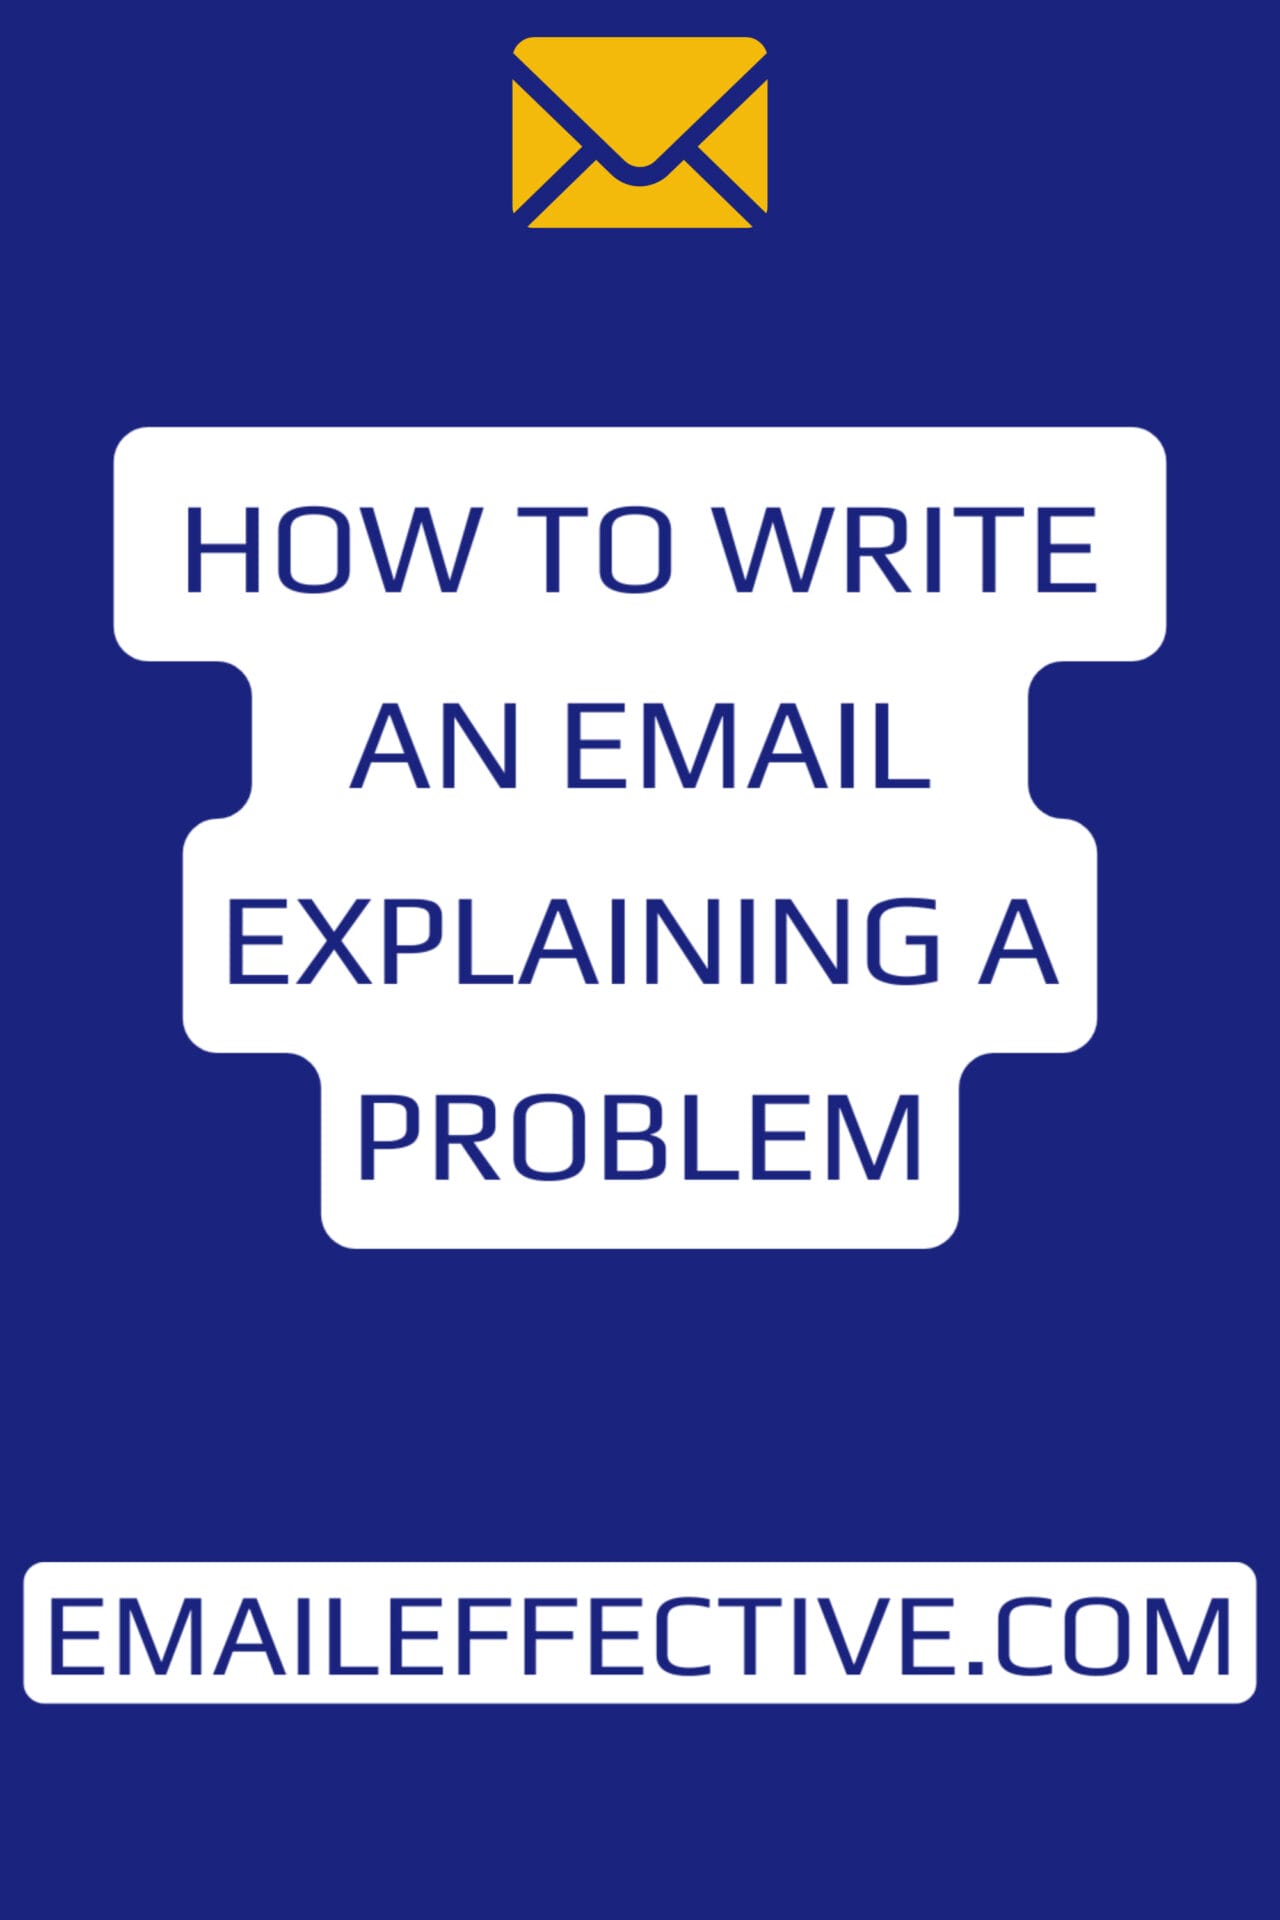 How to Write an Email Explaining a Problem